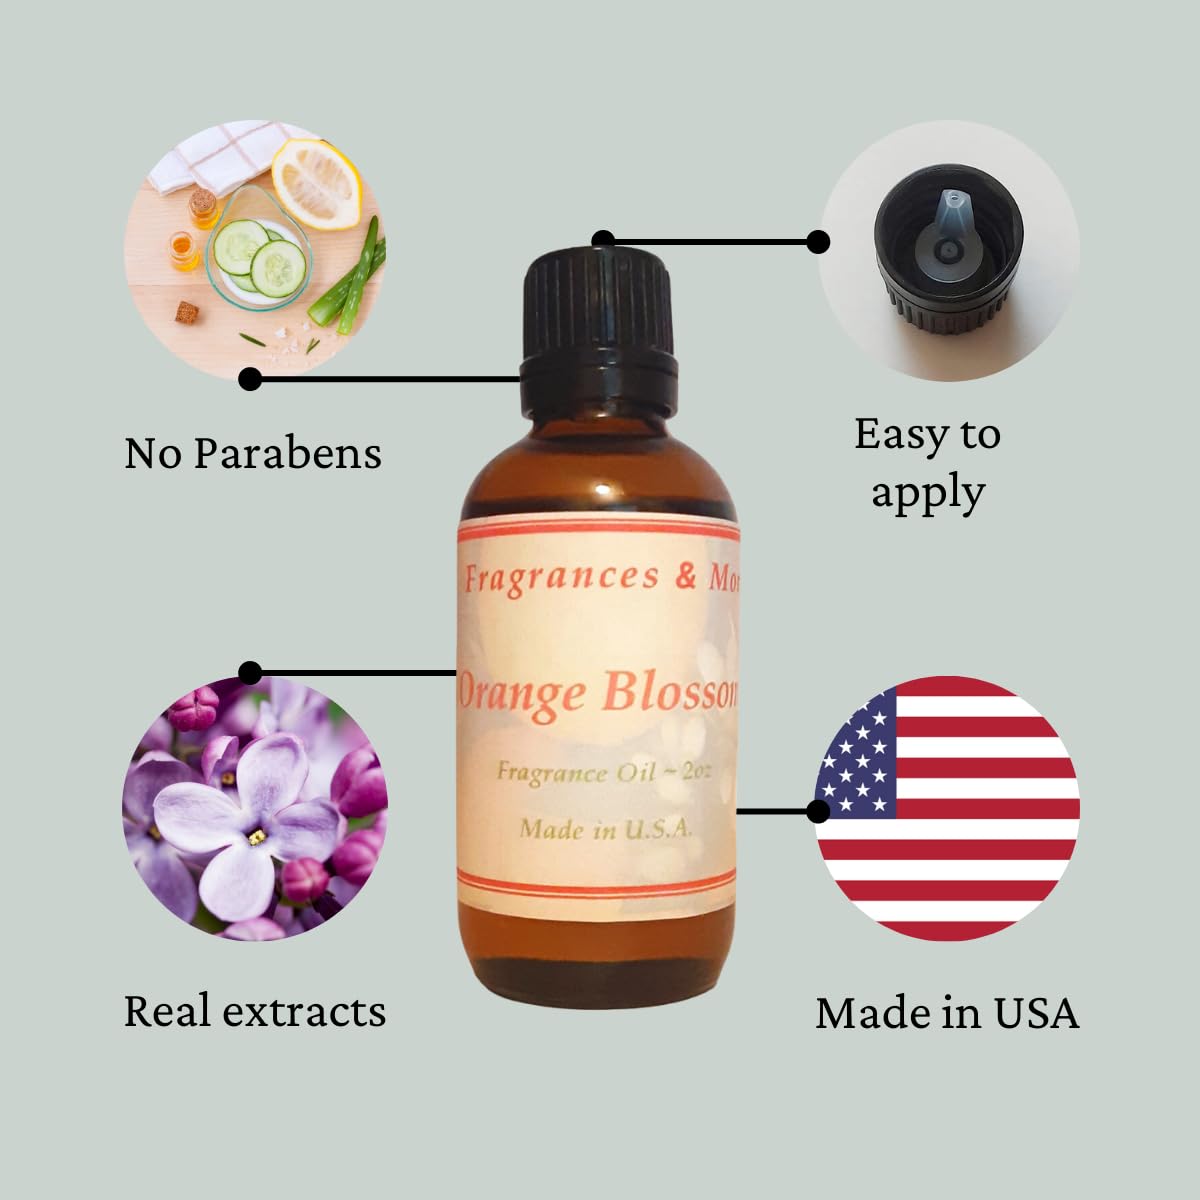 Fragrances & More Orange Blossom Scented Oil - Premium Fragrance Oil to Enhance Soap & Candle Making, Bath & Body Products, Home & Office Scents & Diffuser Aromatherapy - 2oz (60ml) Amber Glass Bottle